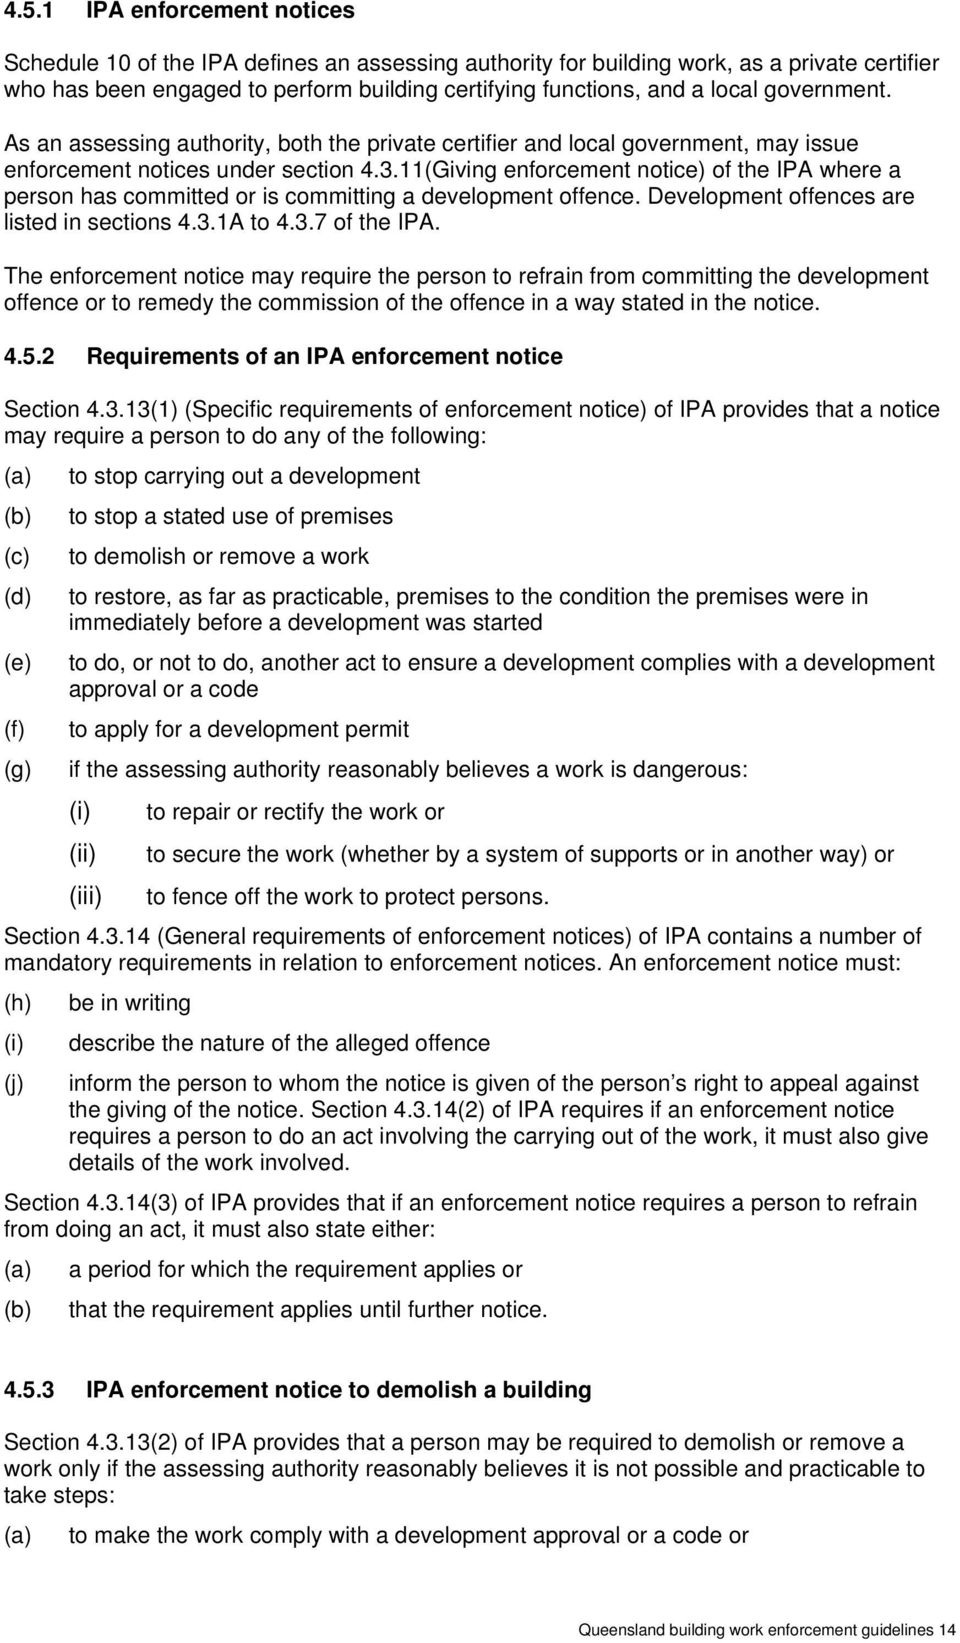 11(Giving enforcement notice) of the IPA where a person has committed or is committing a development offence. Development offences are listed in sections 4.3.1A to 4.3.7 of the IPA.